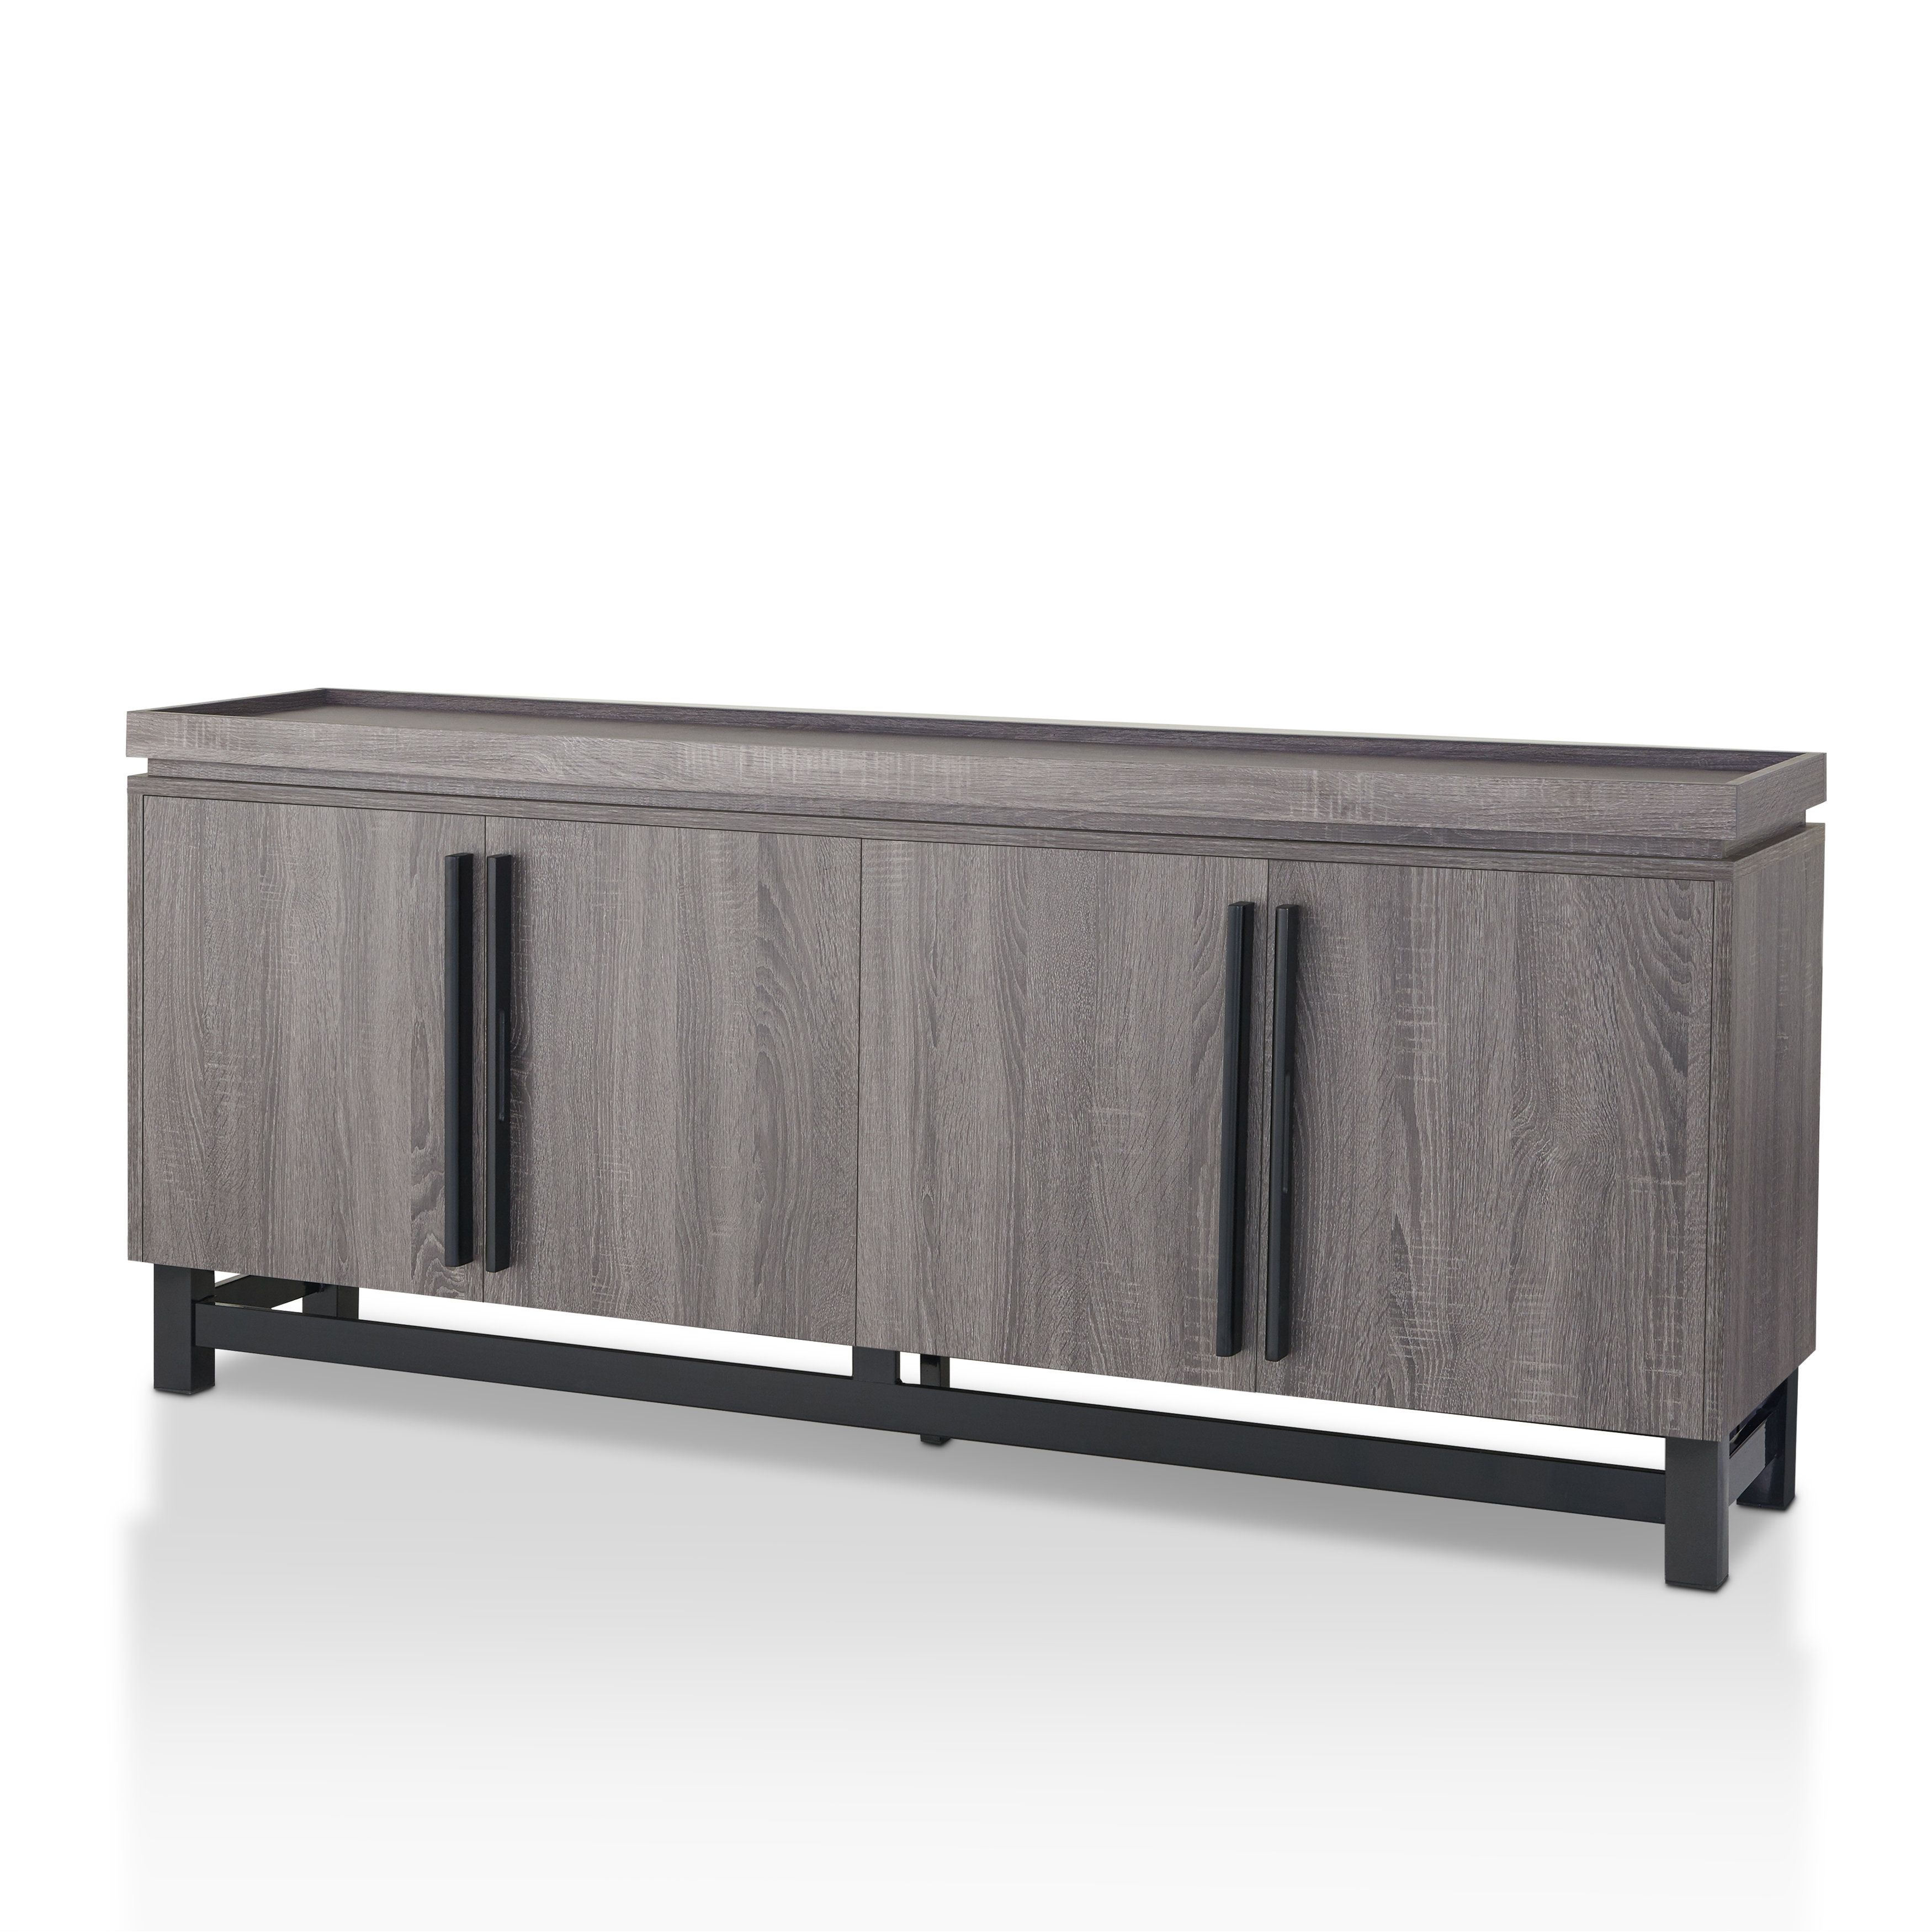 Modern & Contemporary Tangier 4 Door Credenza | Allmodern Inside Best And Newest Malibu 2 Door 1 Drawer Sideboards (View 15 of 20)